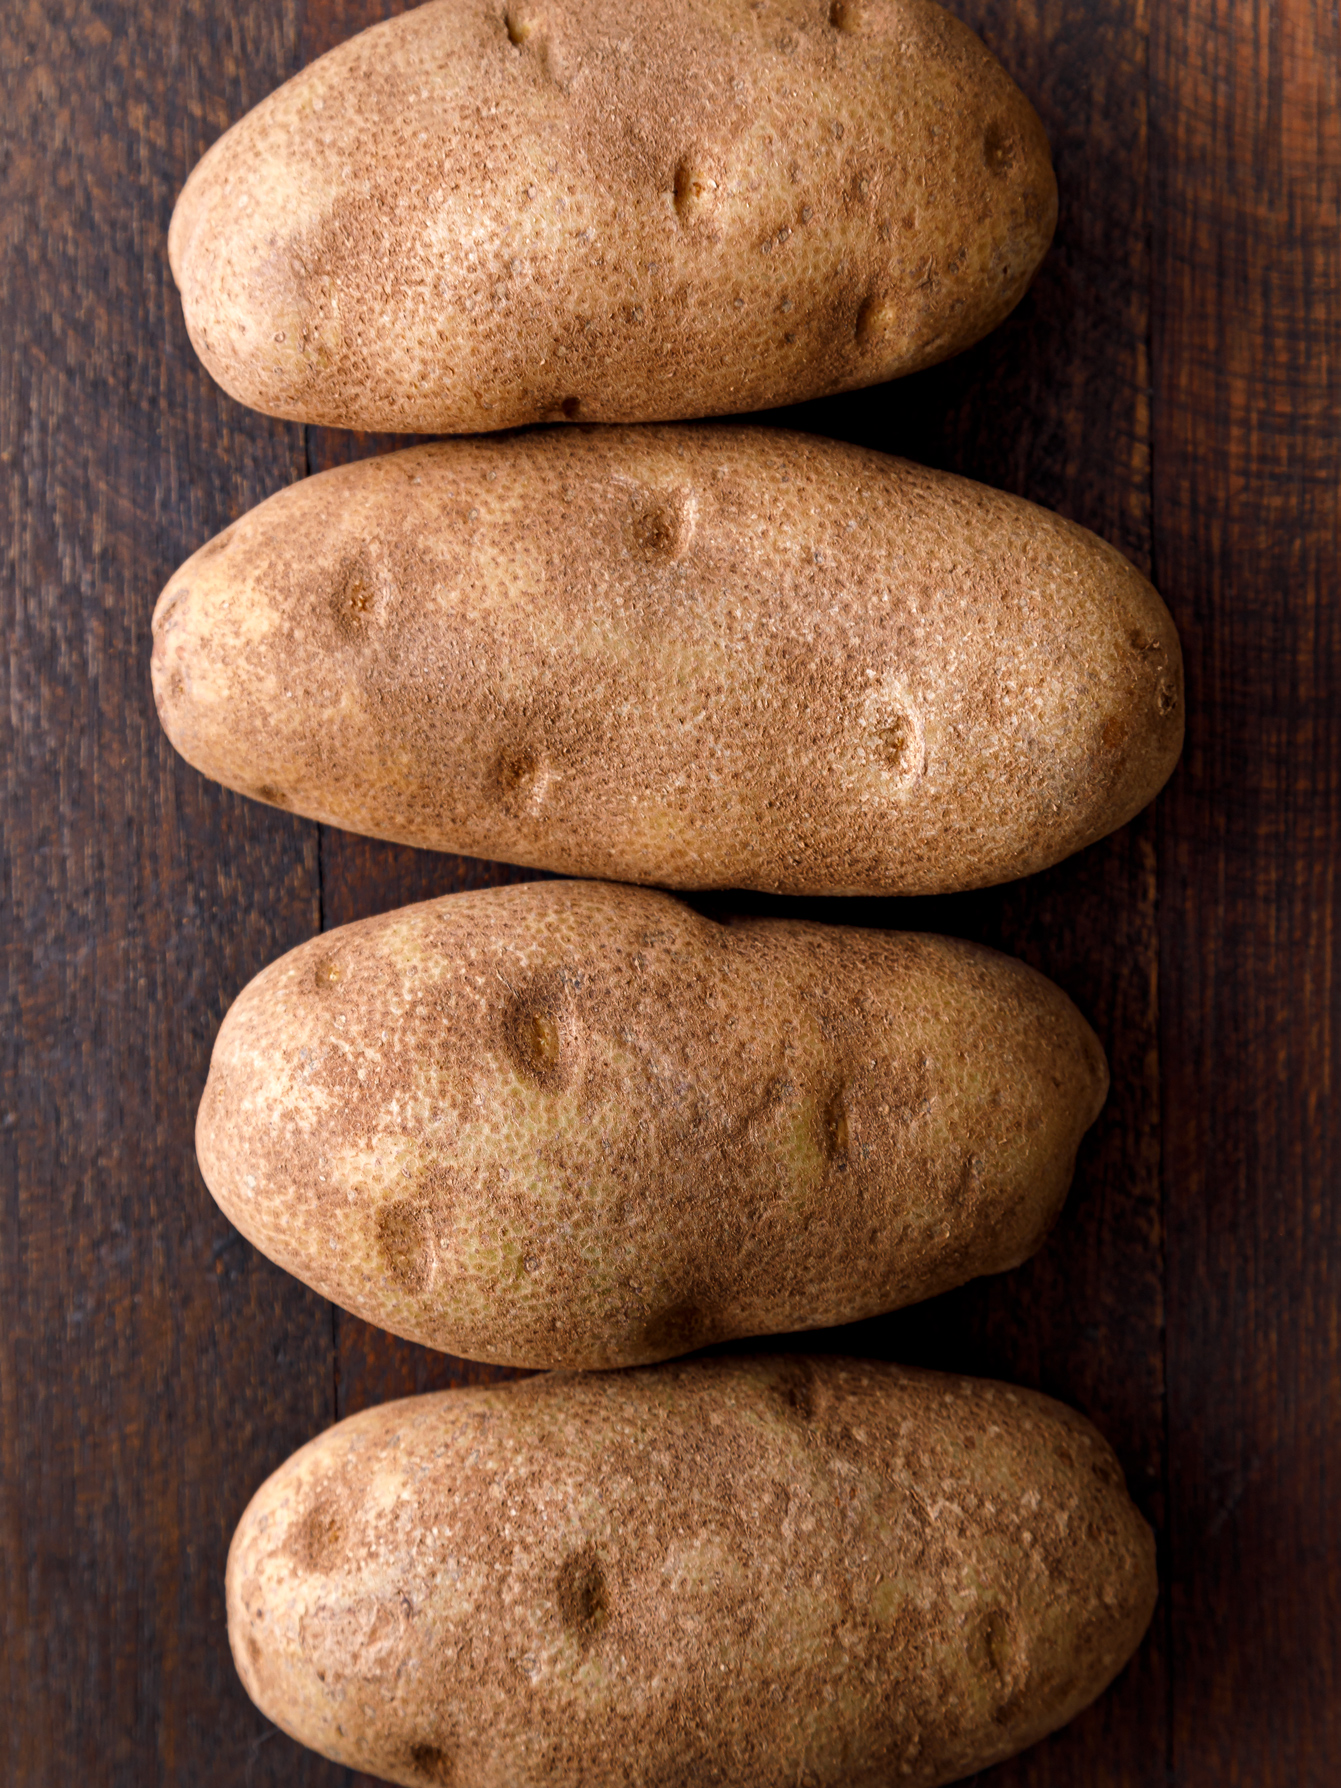 four large russett potatoes lined up ready for baking